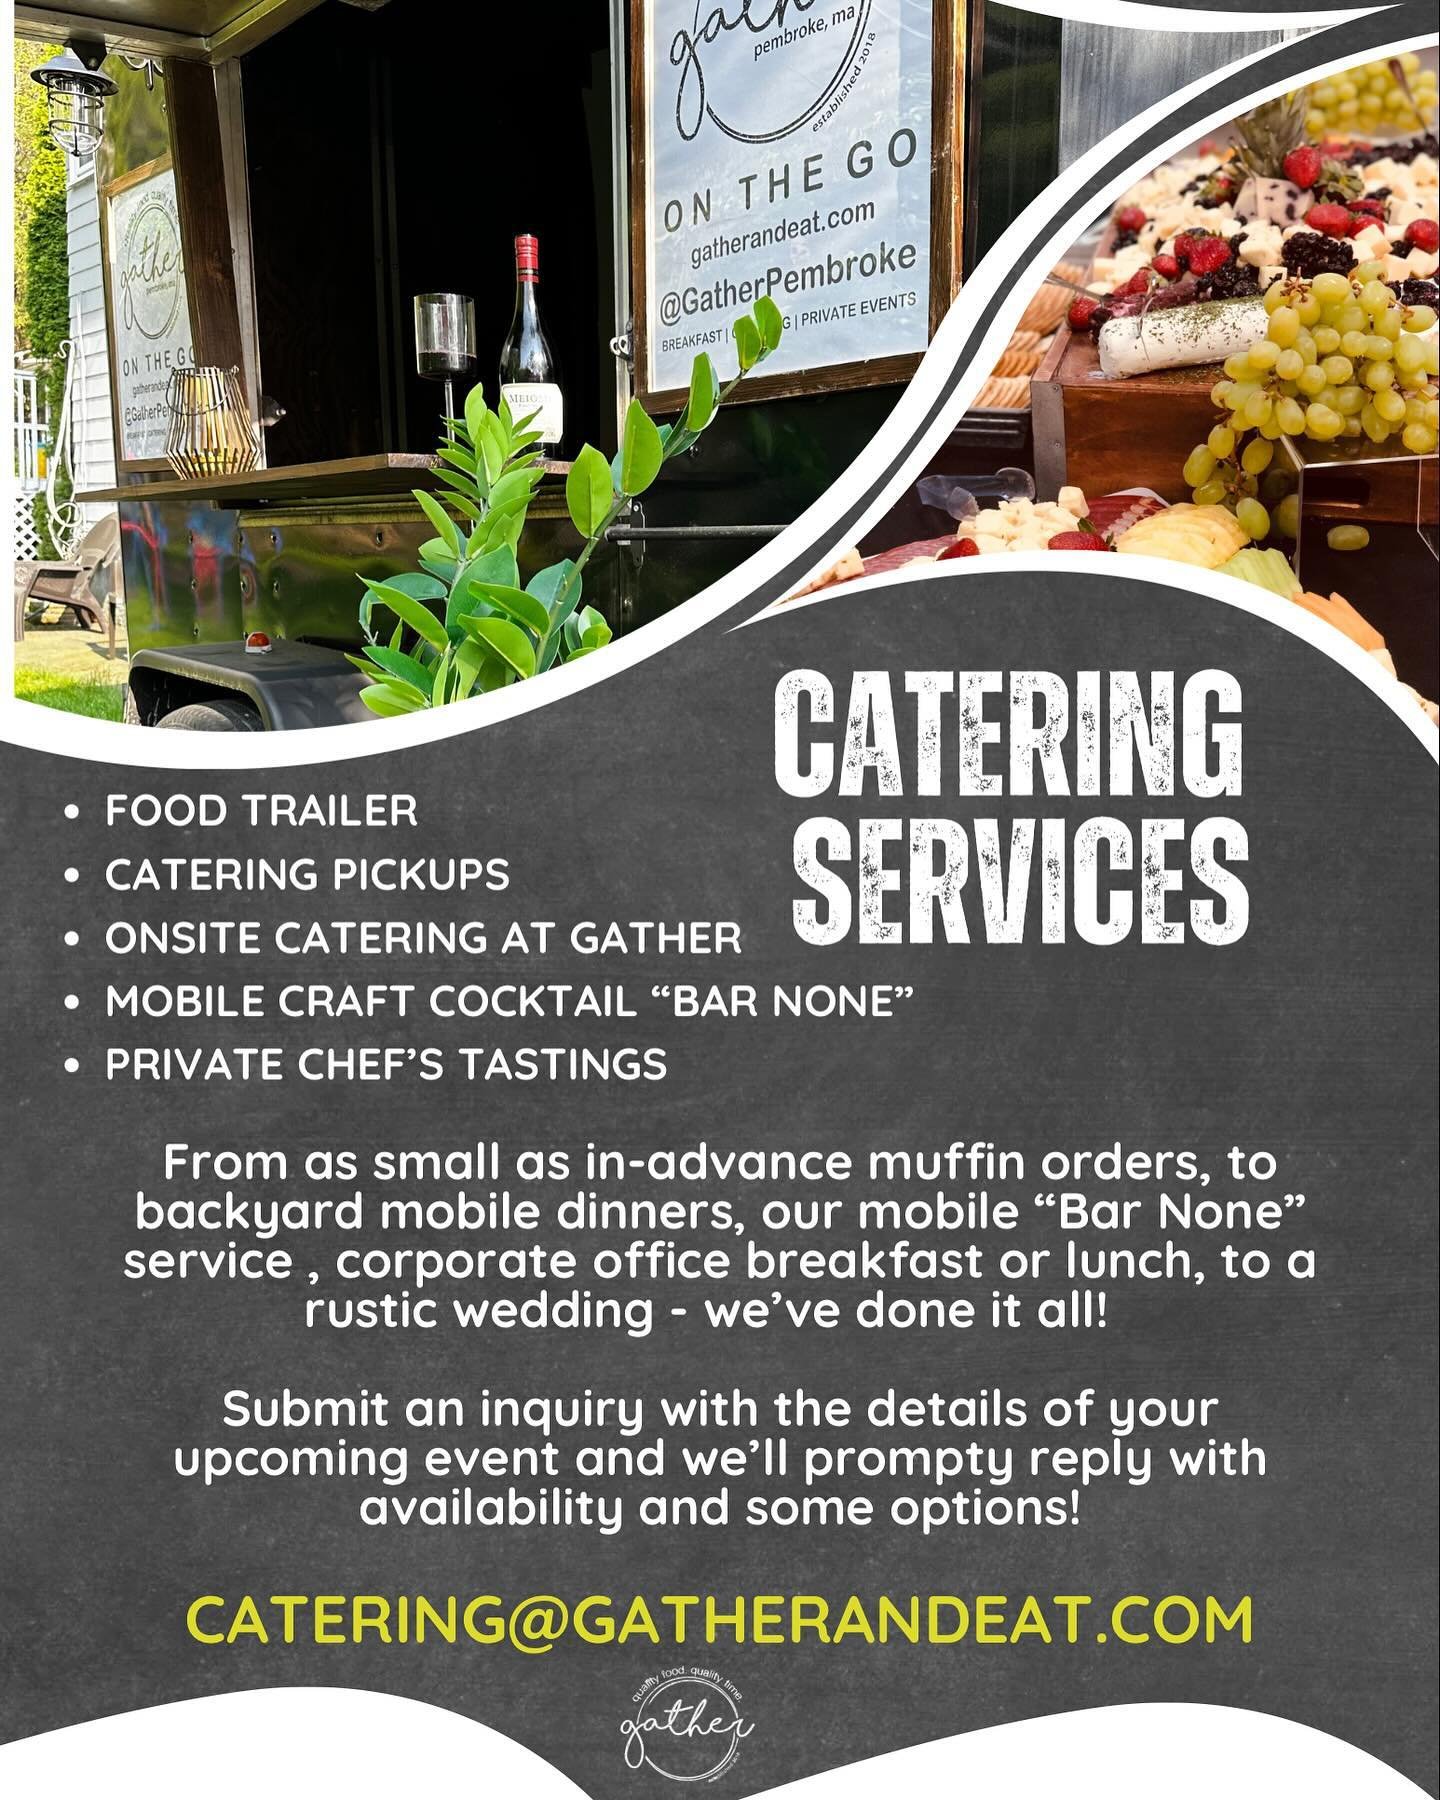 Have an event coming up? Inquire today about our summer availability and catering options! From backyard graduations, birthdays or showers to an intimate private dinner or mobile bar none, we have you covered!